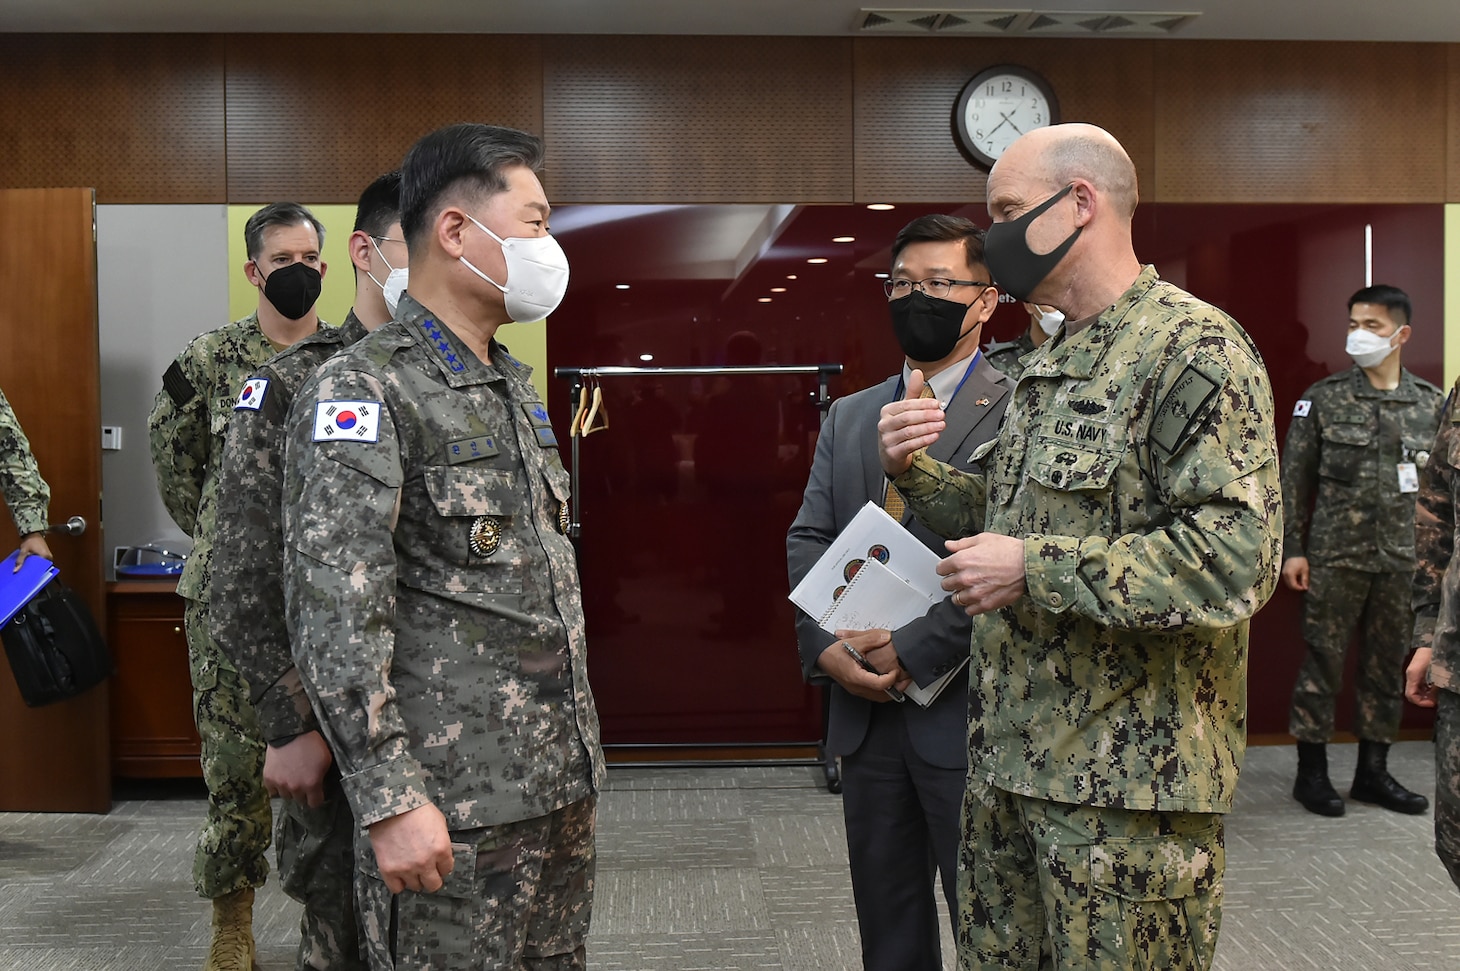 Republic of Korea Airforce General Won In Choul, Chairman of Republic Of Korea Joint Chiefs of Staff, meets Vice Adm. Bill Merz, Commander, US 7th Fleet. As the U.S. Navy's largest forward-deployed fleet, 7th Fleet employs 50-70 ships and submarines across the Western Pacific and Indian Oceans. Commander, U.S. 7th Fleet visited the Republic of Korea to meet with Korean military leadership as part of a scheduled trip to promote preparedness and partnership in the region where U.S. 7th Fleet routinely operates and interacts with 35 maritime nations while conducting missions to preserve and protect a free and open Indo-Pacific.